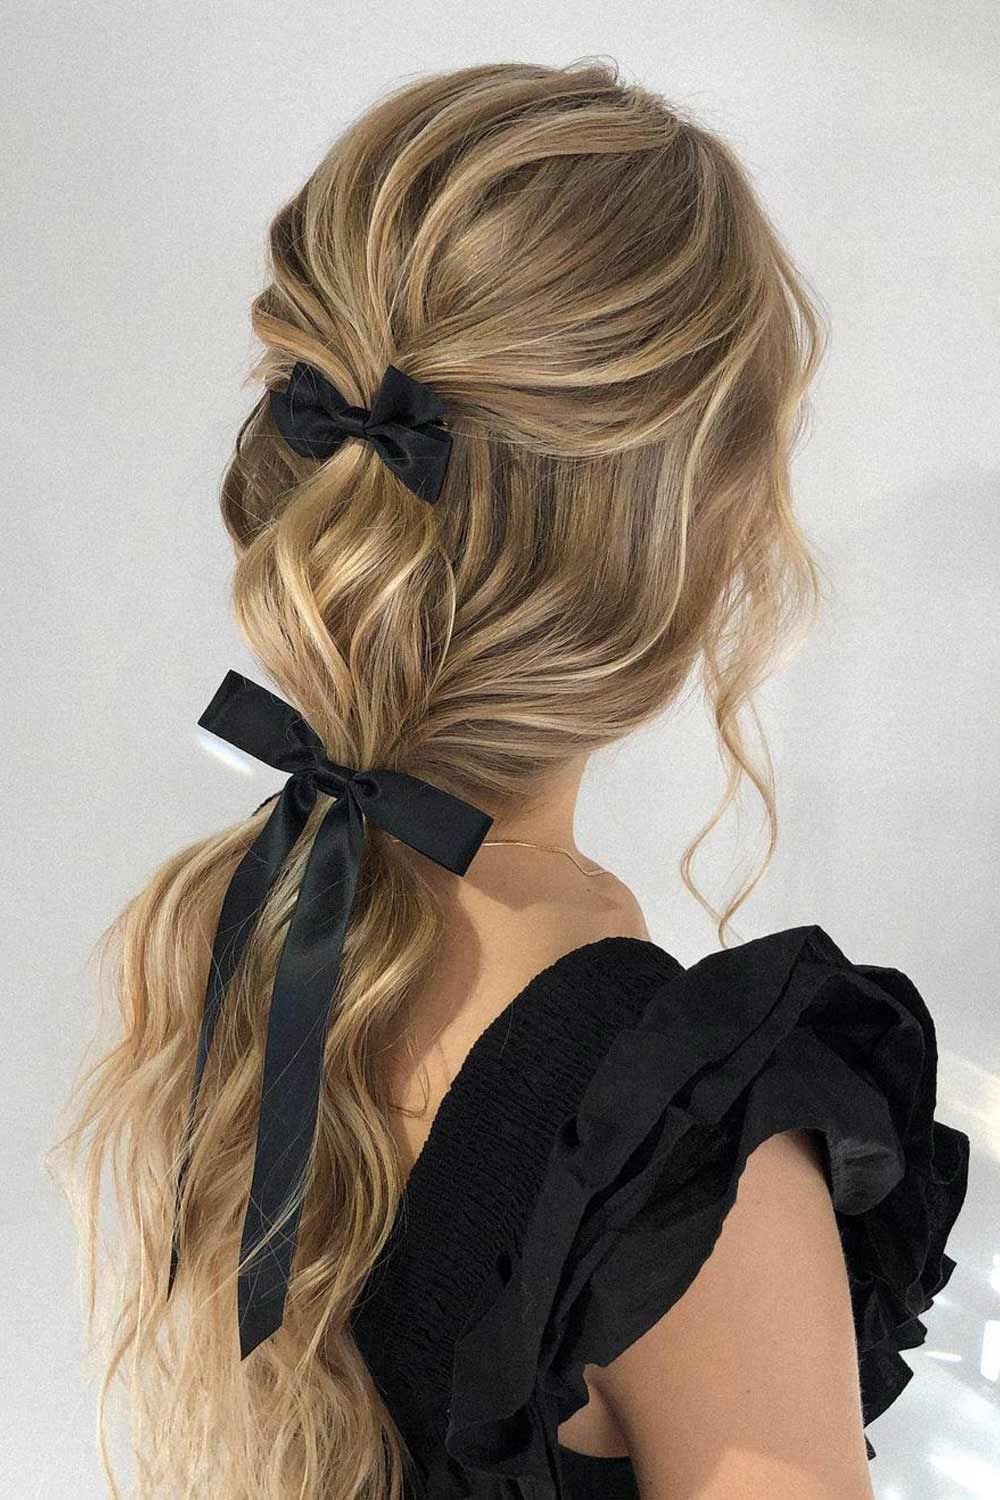 Long and Luxurious: Embracing the Beauty of Lengthy Hairstyles